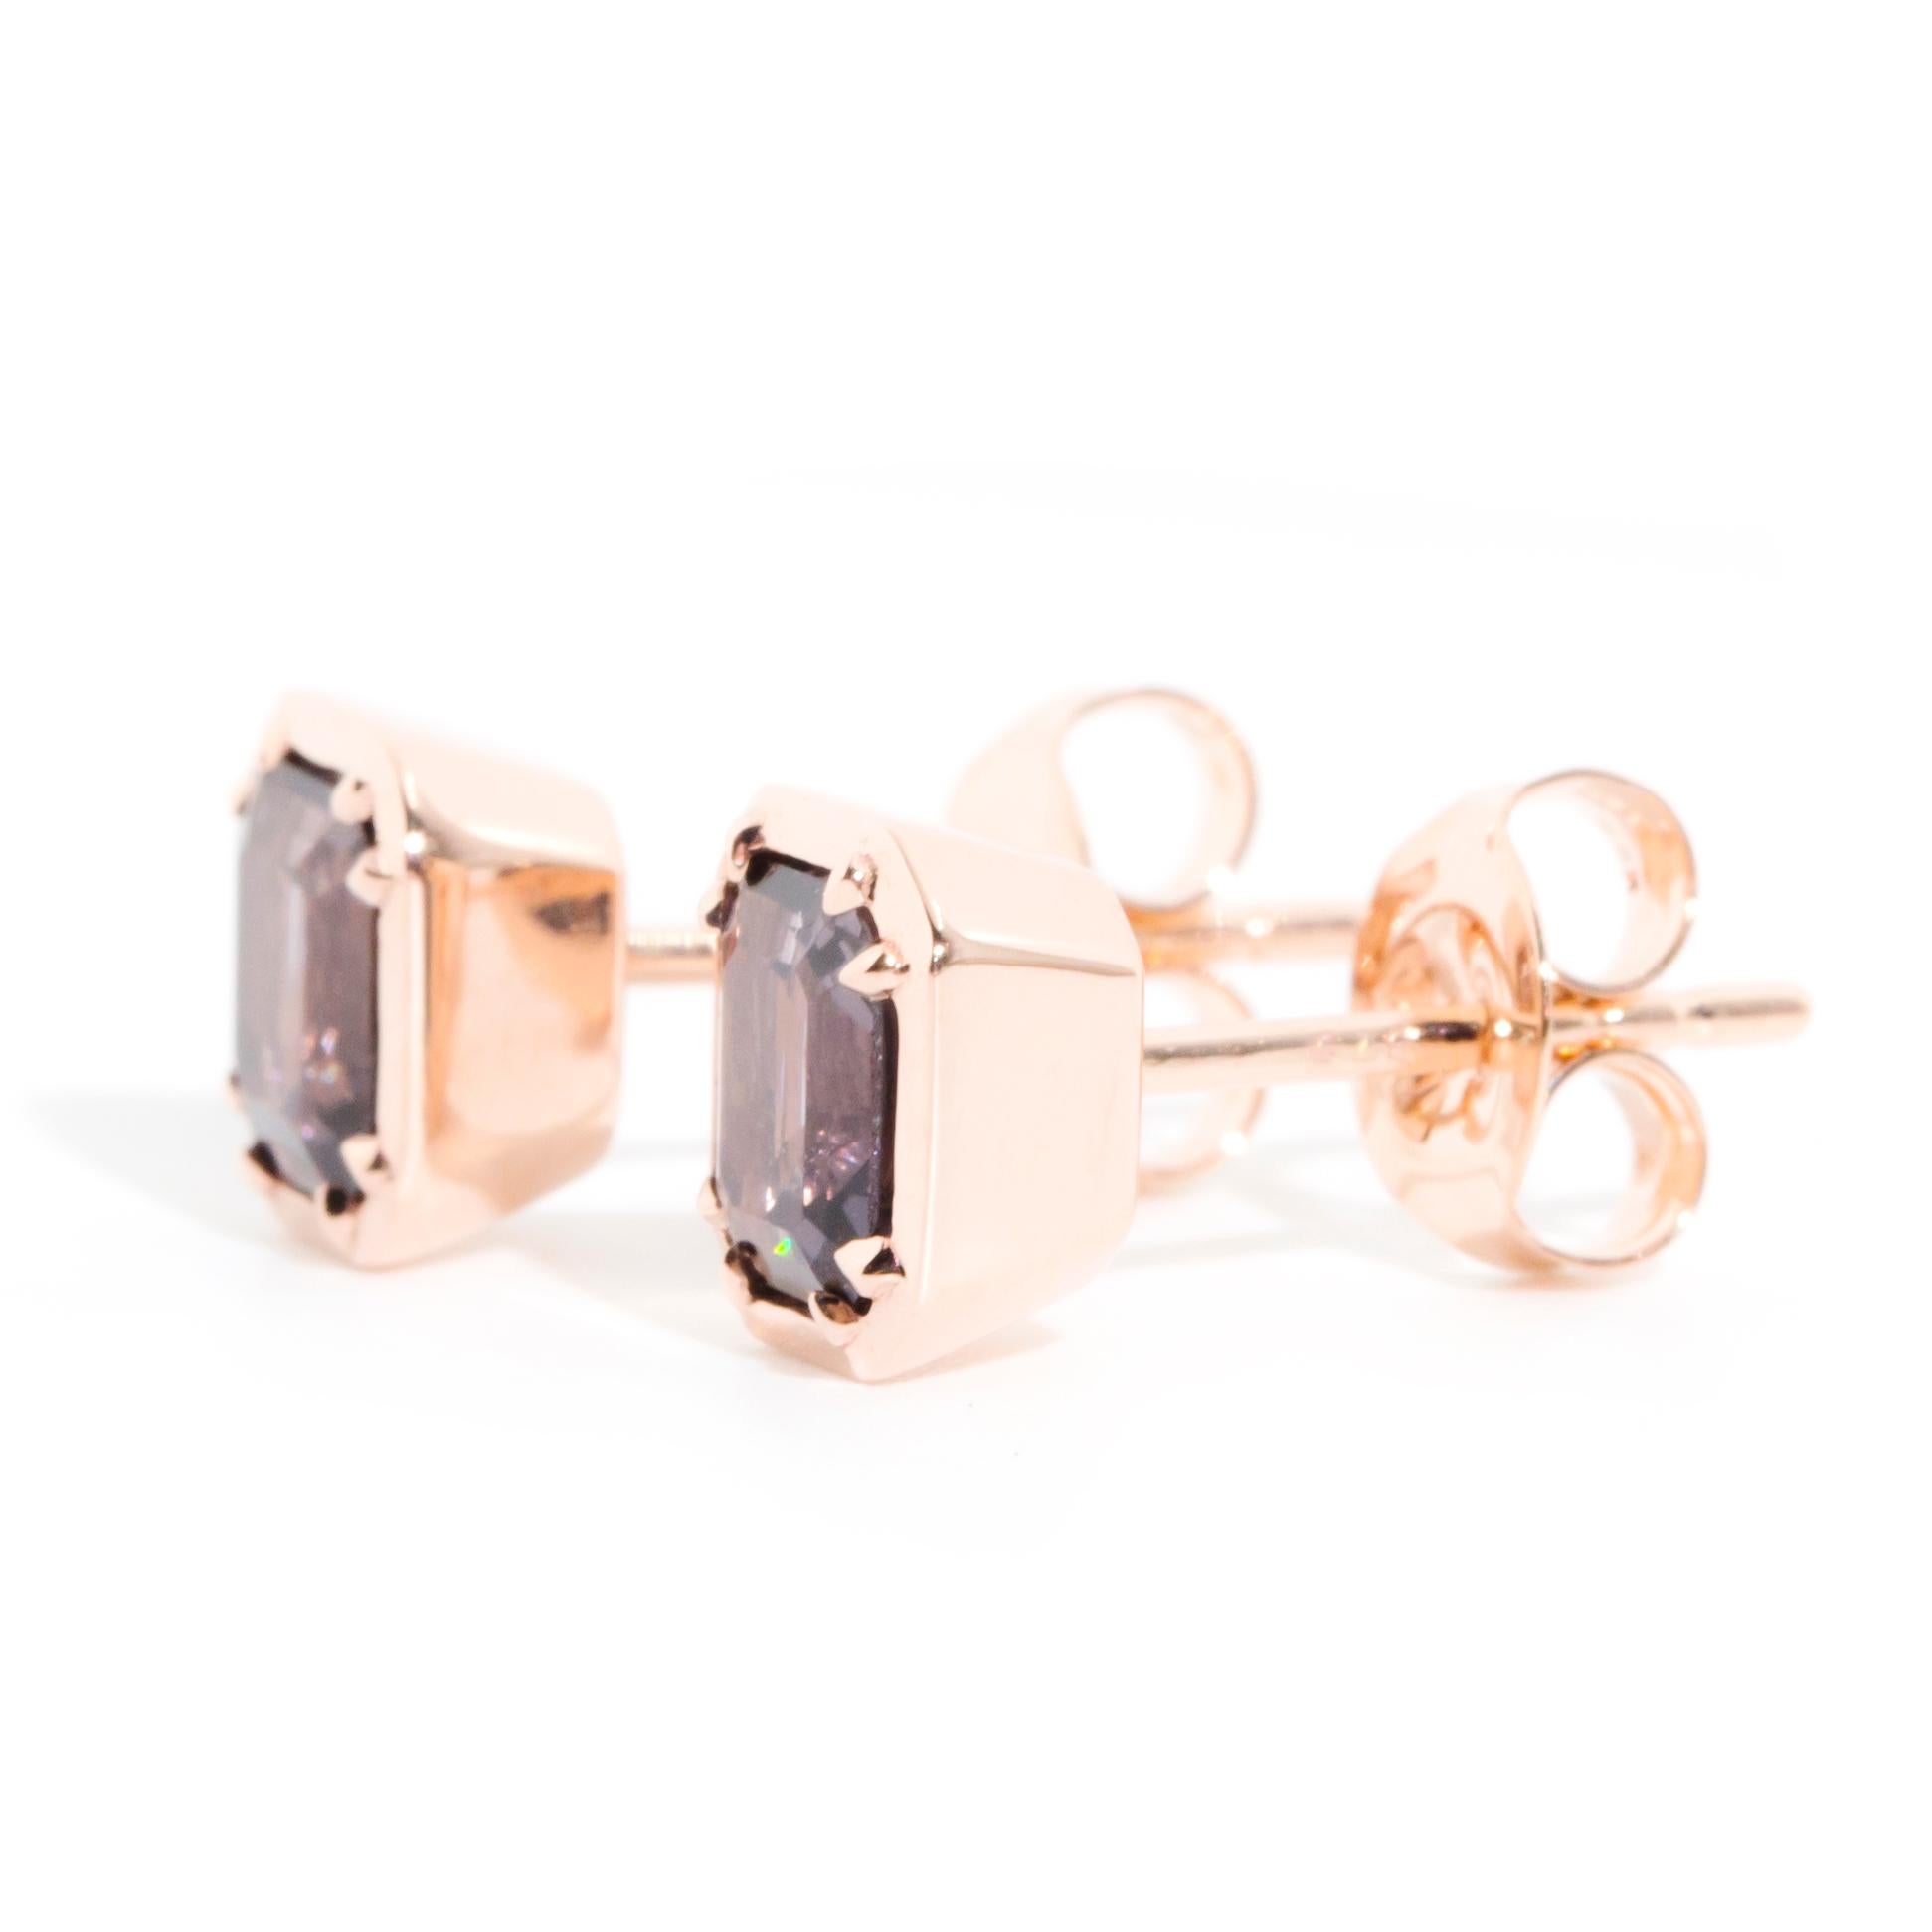 Bright Purple Spinel Contemporary Stud Style Earrings in 9 Carat Rose Gold For Sale 3